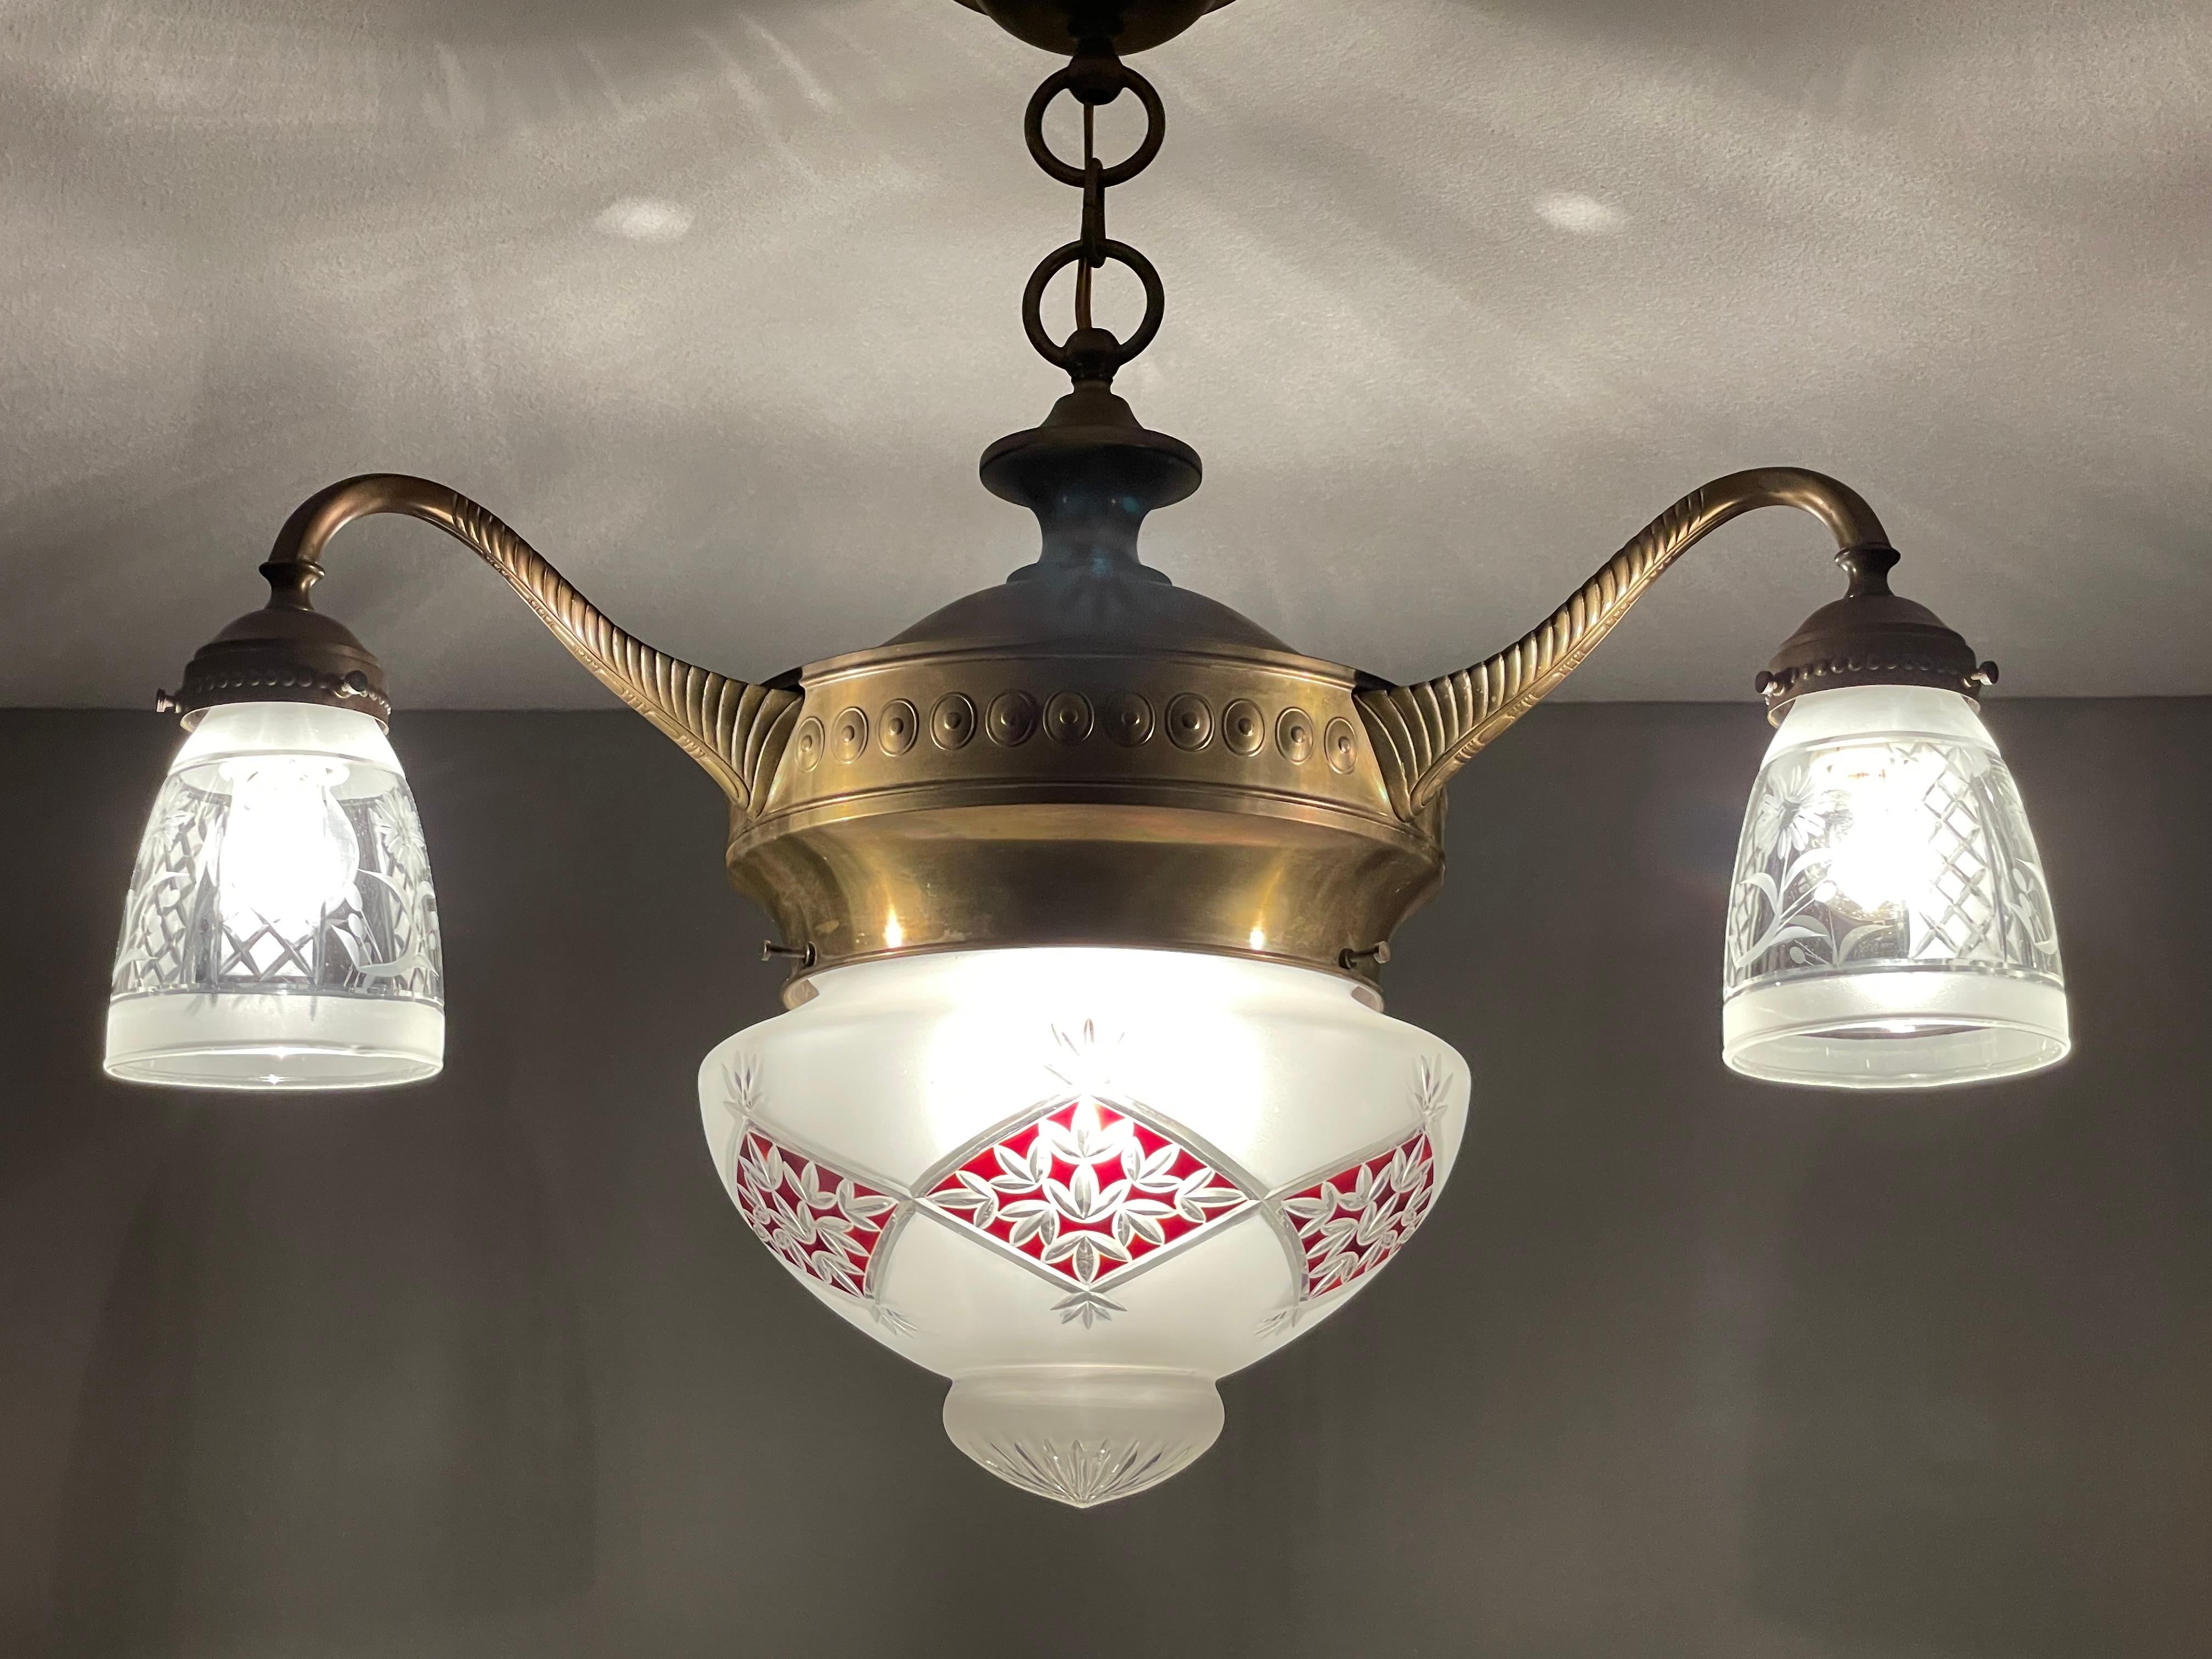 Perfectly handmade, European Arts and Crafts four-light chandelier.

If you are looking for a stylish and beautiful chandelier to grace your living space then this fine specimen from the earliest years of the 1900s could be yours to own and enjoy